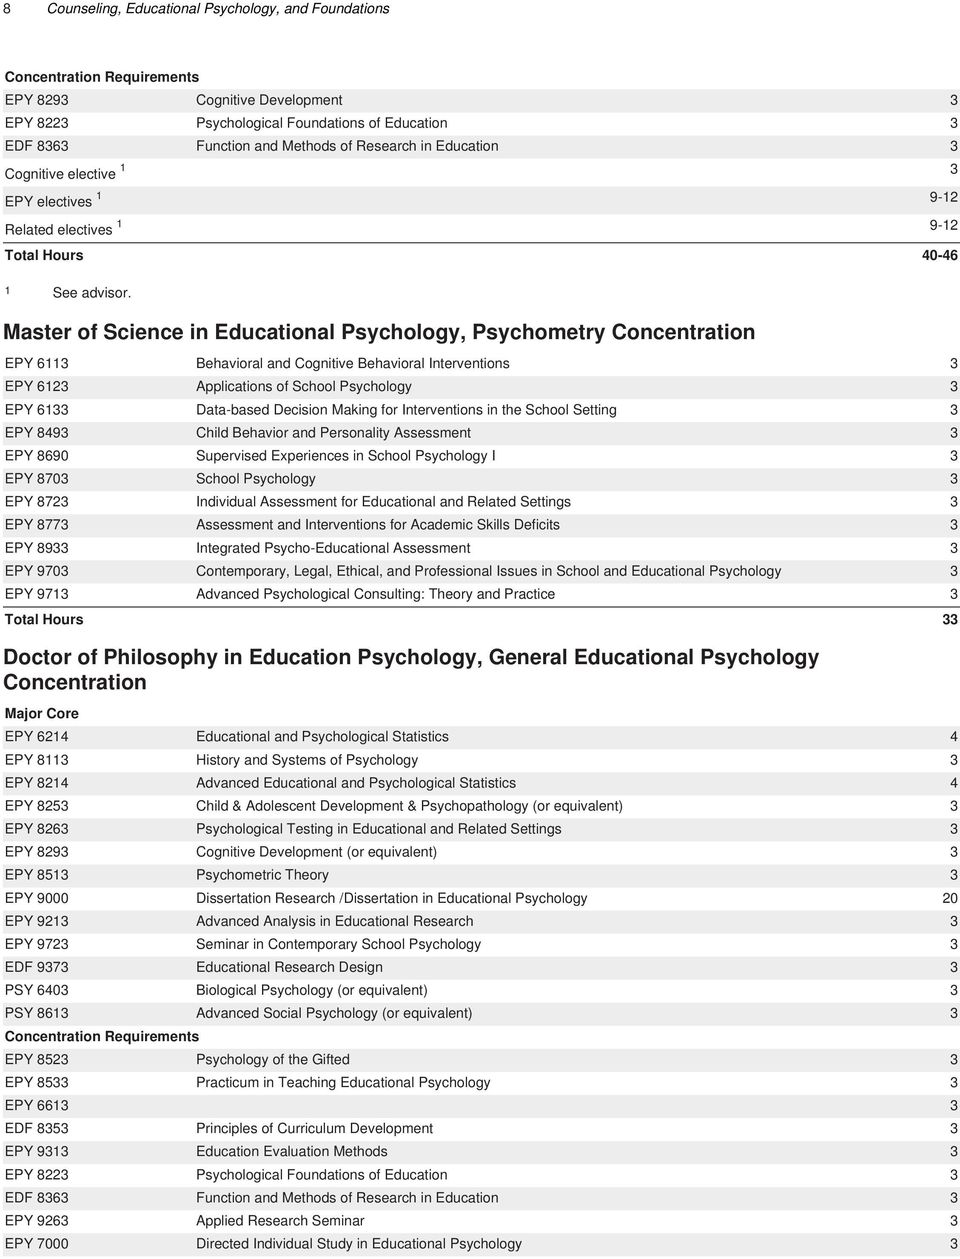 Master of Science in Educational Psychology, Psychometry Concentration EPY 6113 Behavioral and Cognitive Behavioral Interventions 3 EPY 6123 Applications of School Psychology 3 EPY 6133 Data-based